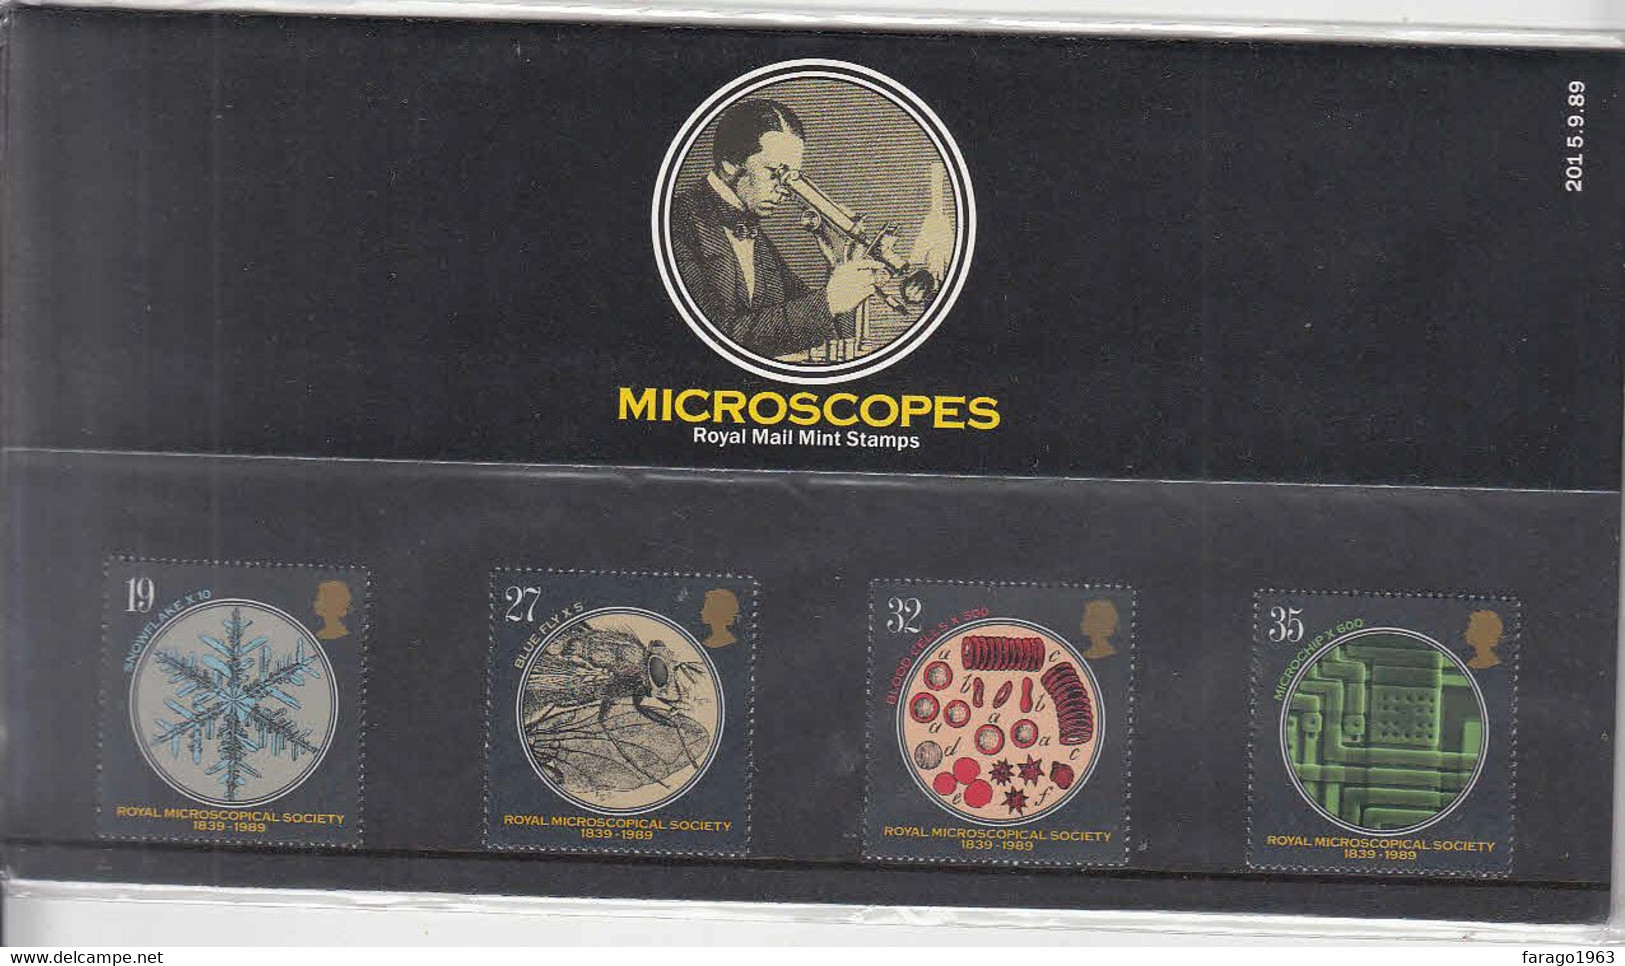 1989 Great Britain Microscopes Science Disease Health Presentation Pack Complete MNH - Drugs